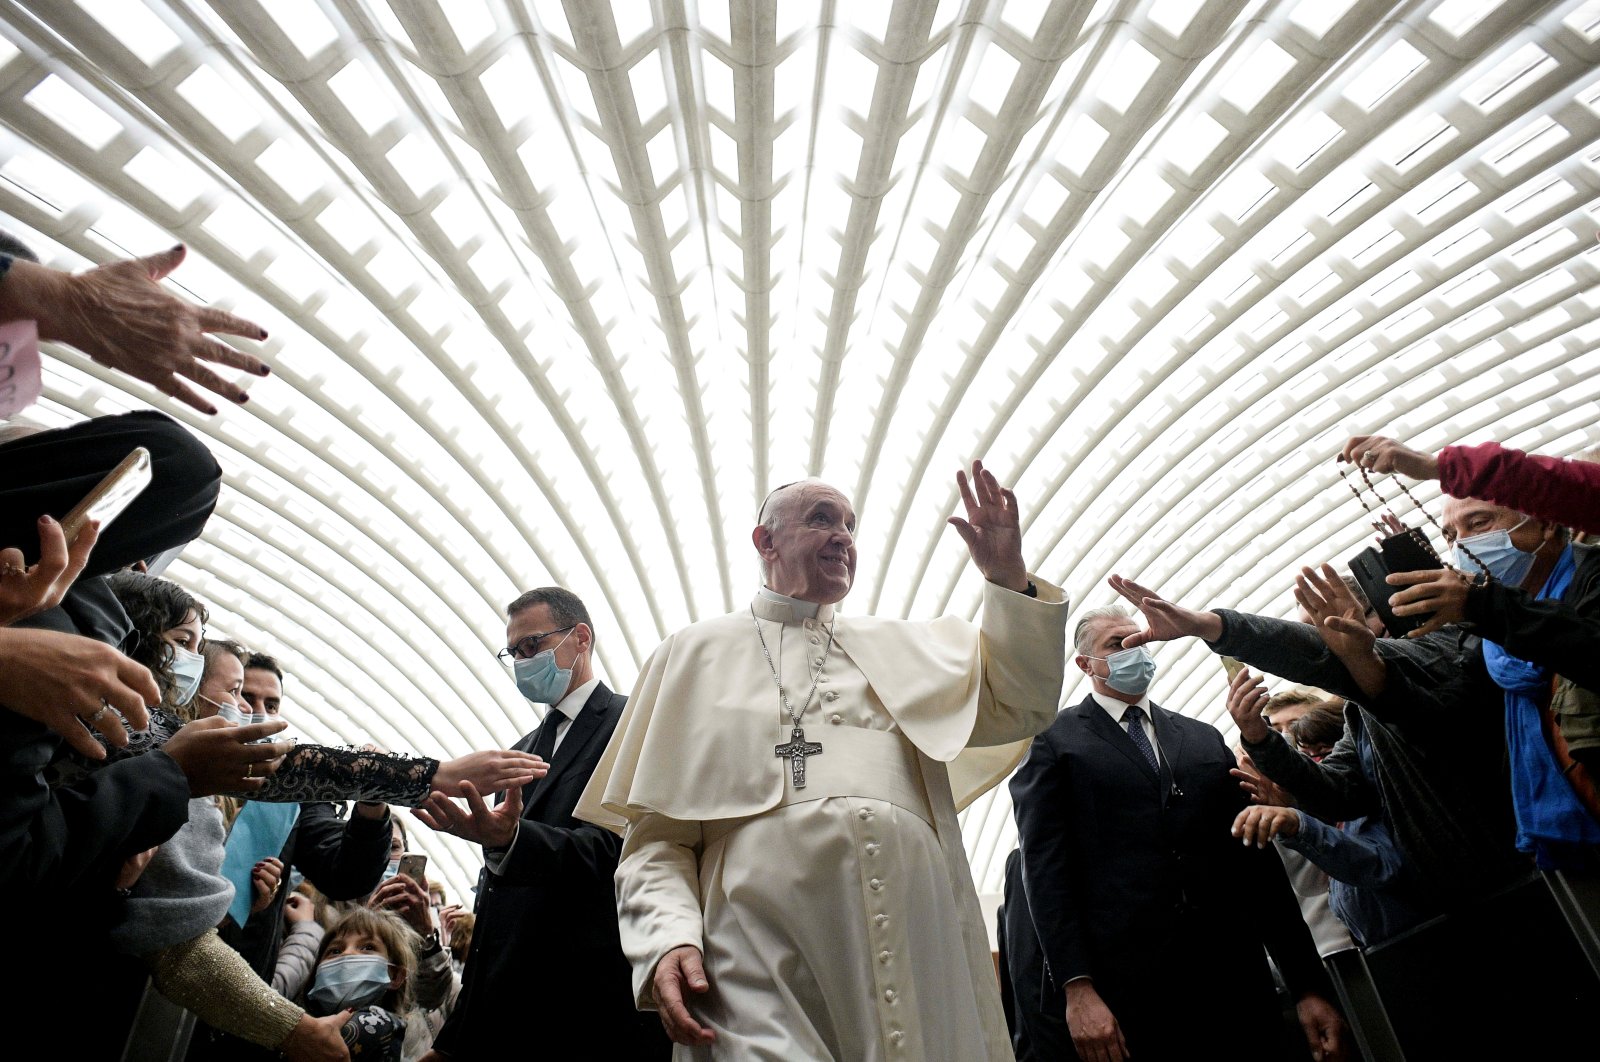 Pope Francis greets people during the weekly general audience at the Vatican, Oct. 20, 2021. (Vatican Media ­Handout via Reuters)